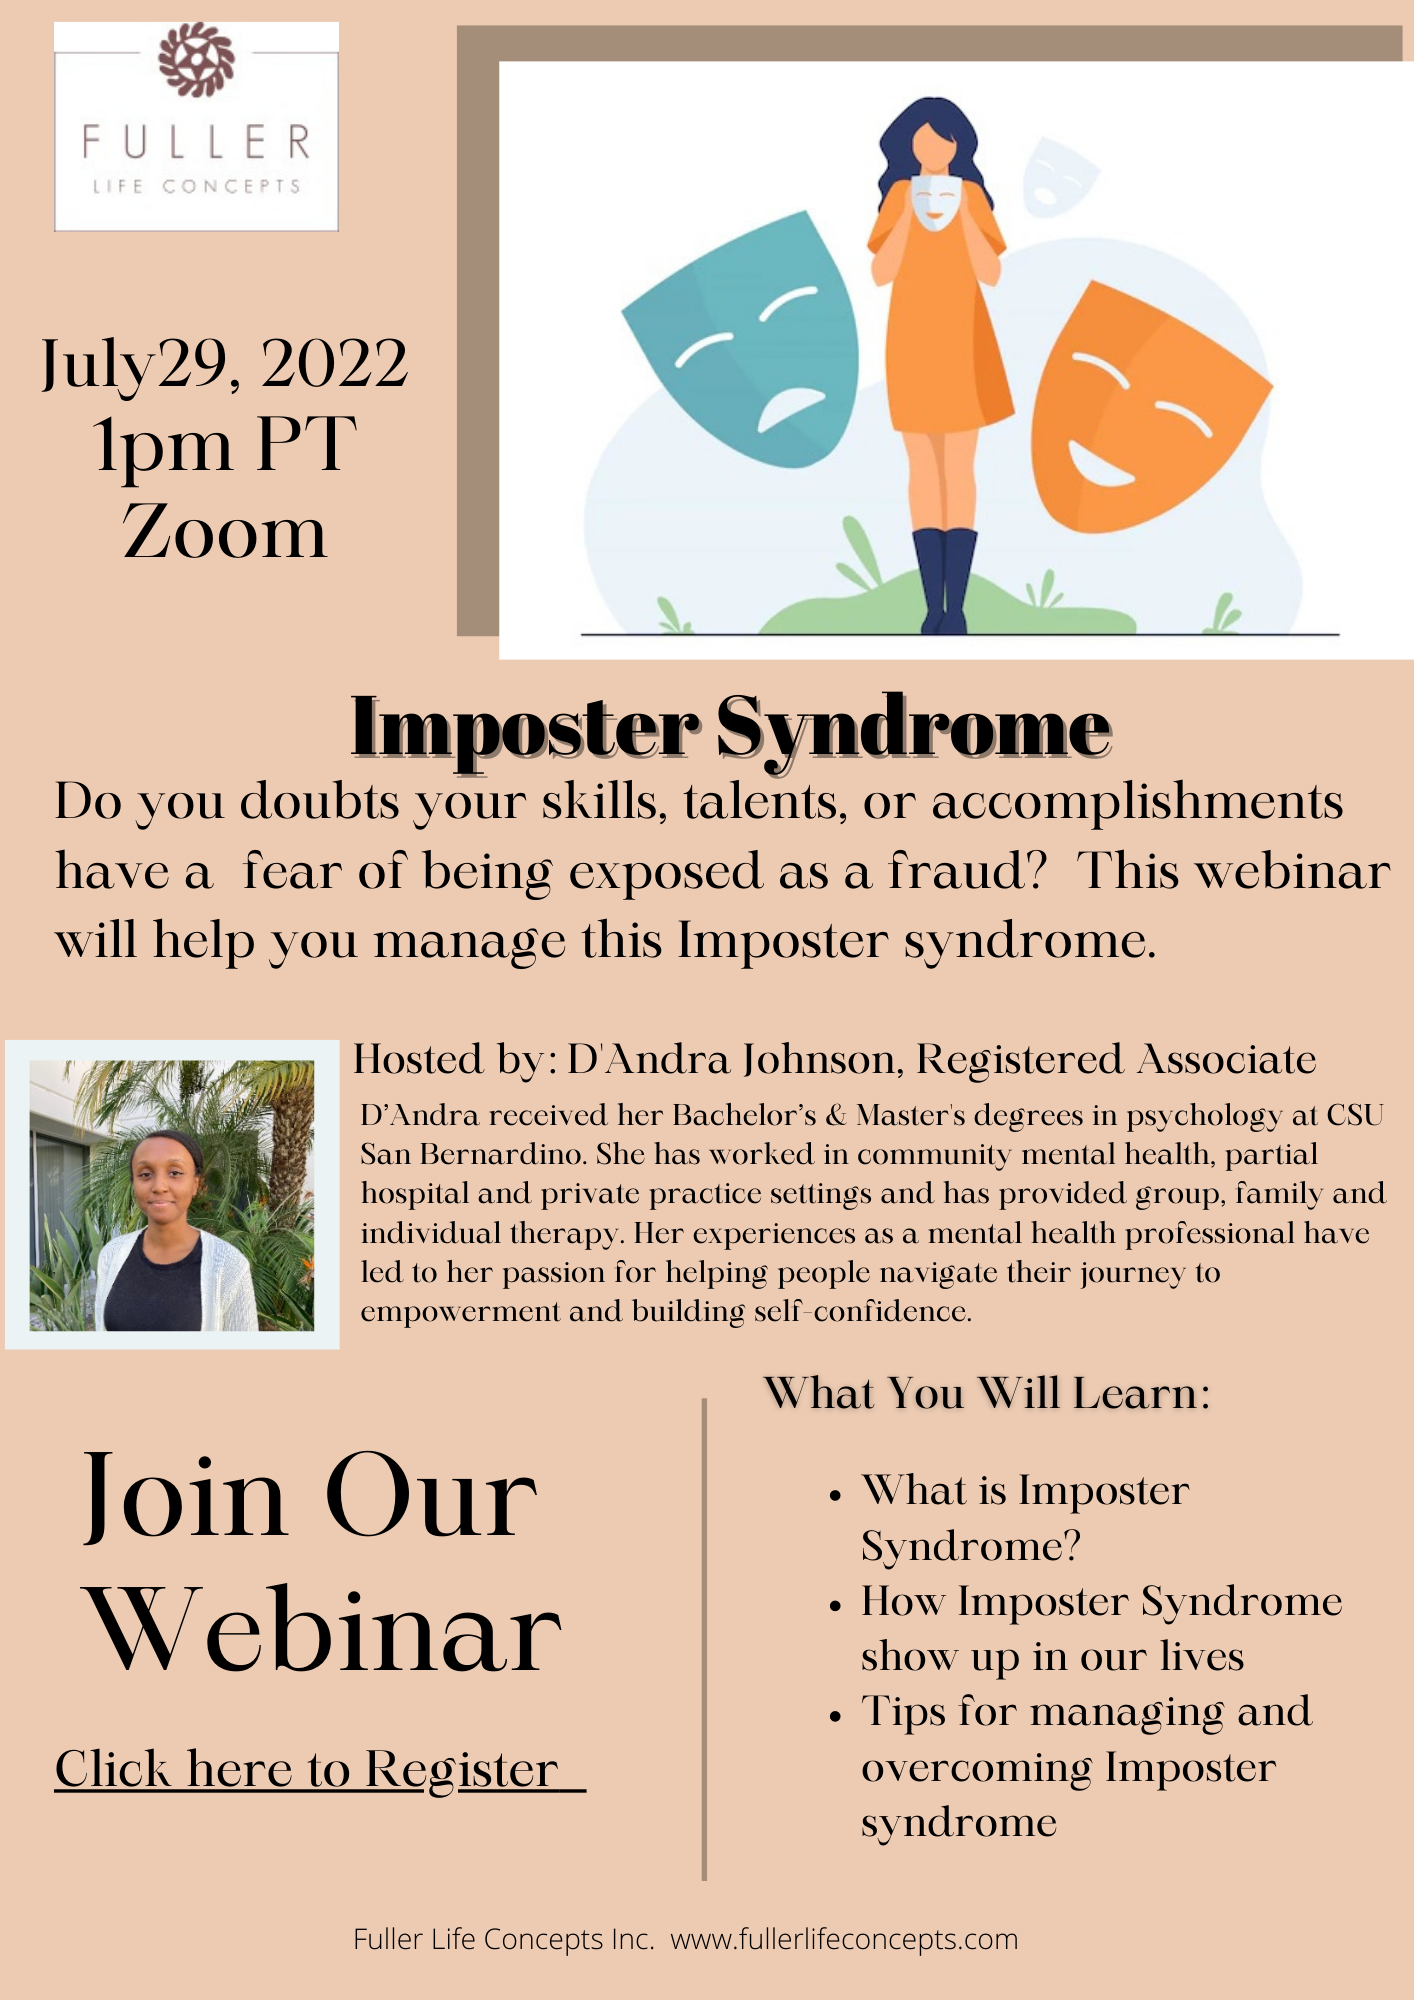 https://www.fullerlifeconcepts.com/wp-content/uploads/2022/07/Imposter-syndrome-Johnson.png